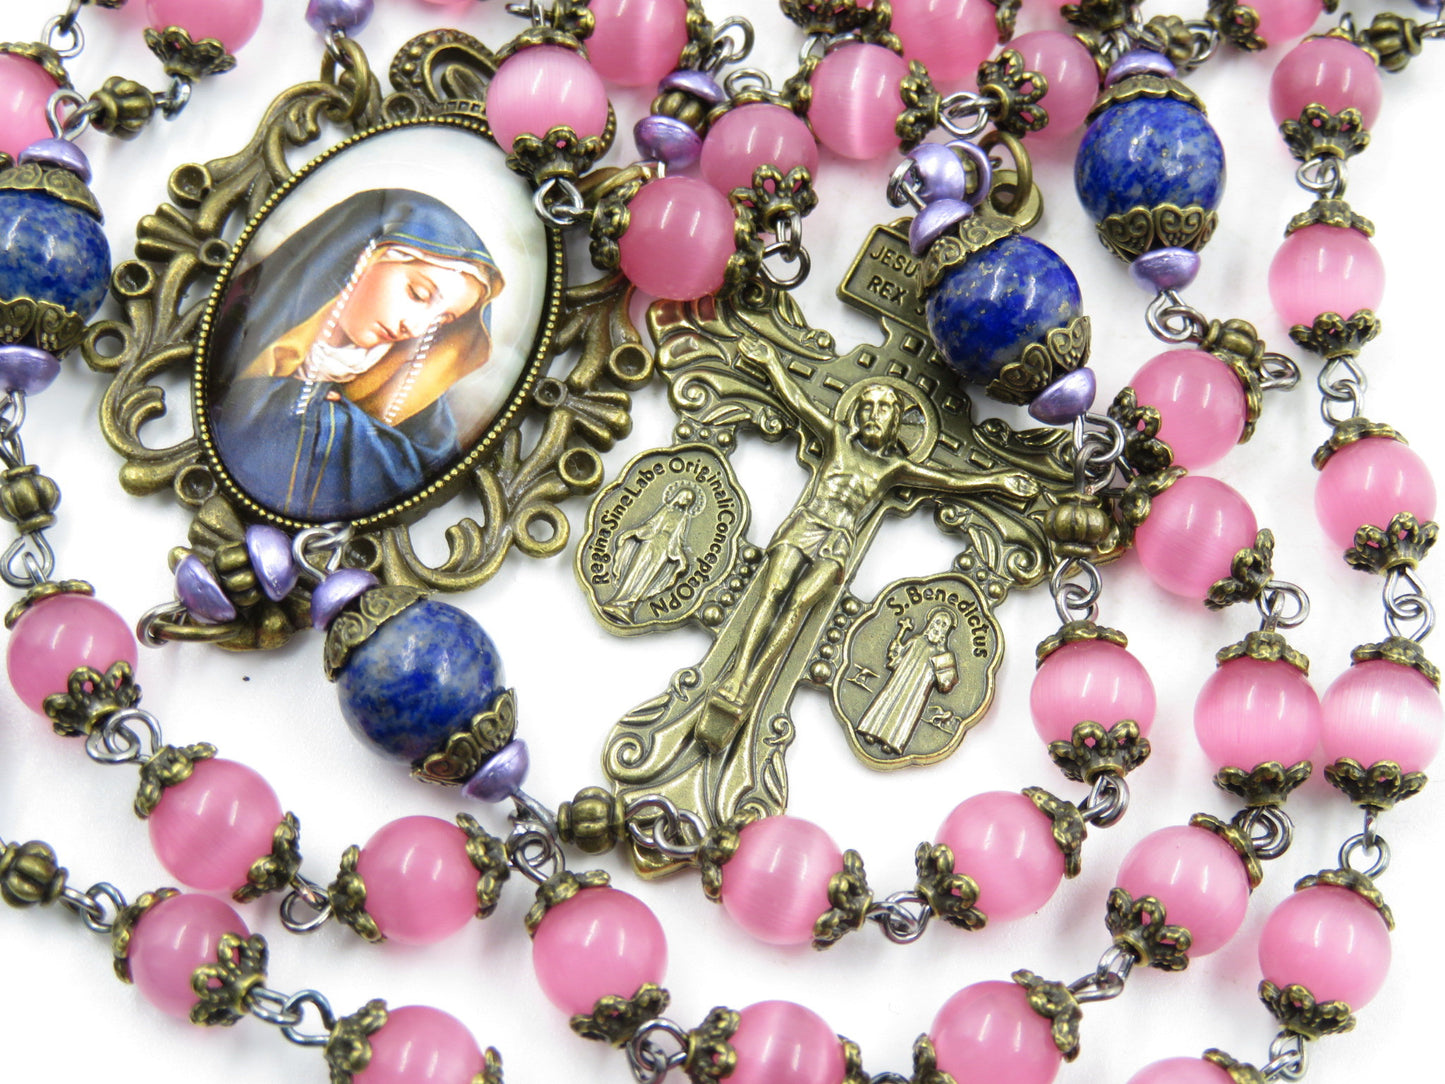 Vintage style Our Lady of Sorrows rosary beads, Lapis Lazuli rosaries, Dolor Rosary beads, wedding Rosaries, Confirmation Rosary.